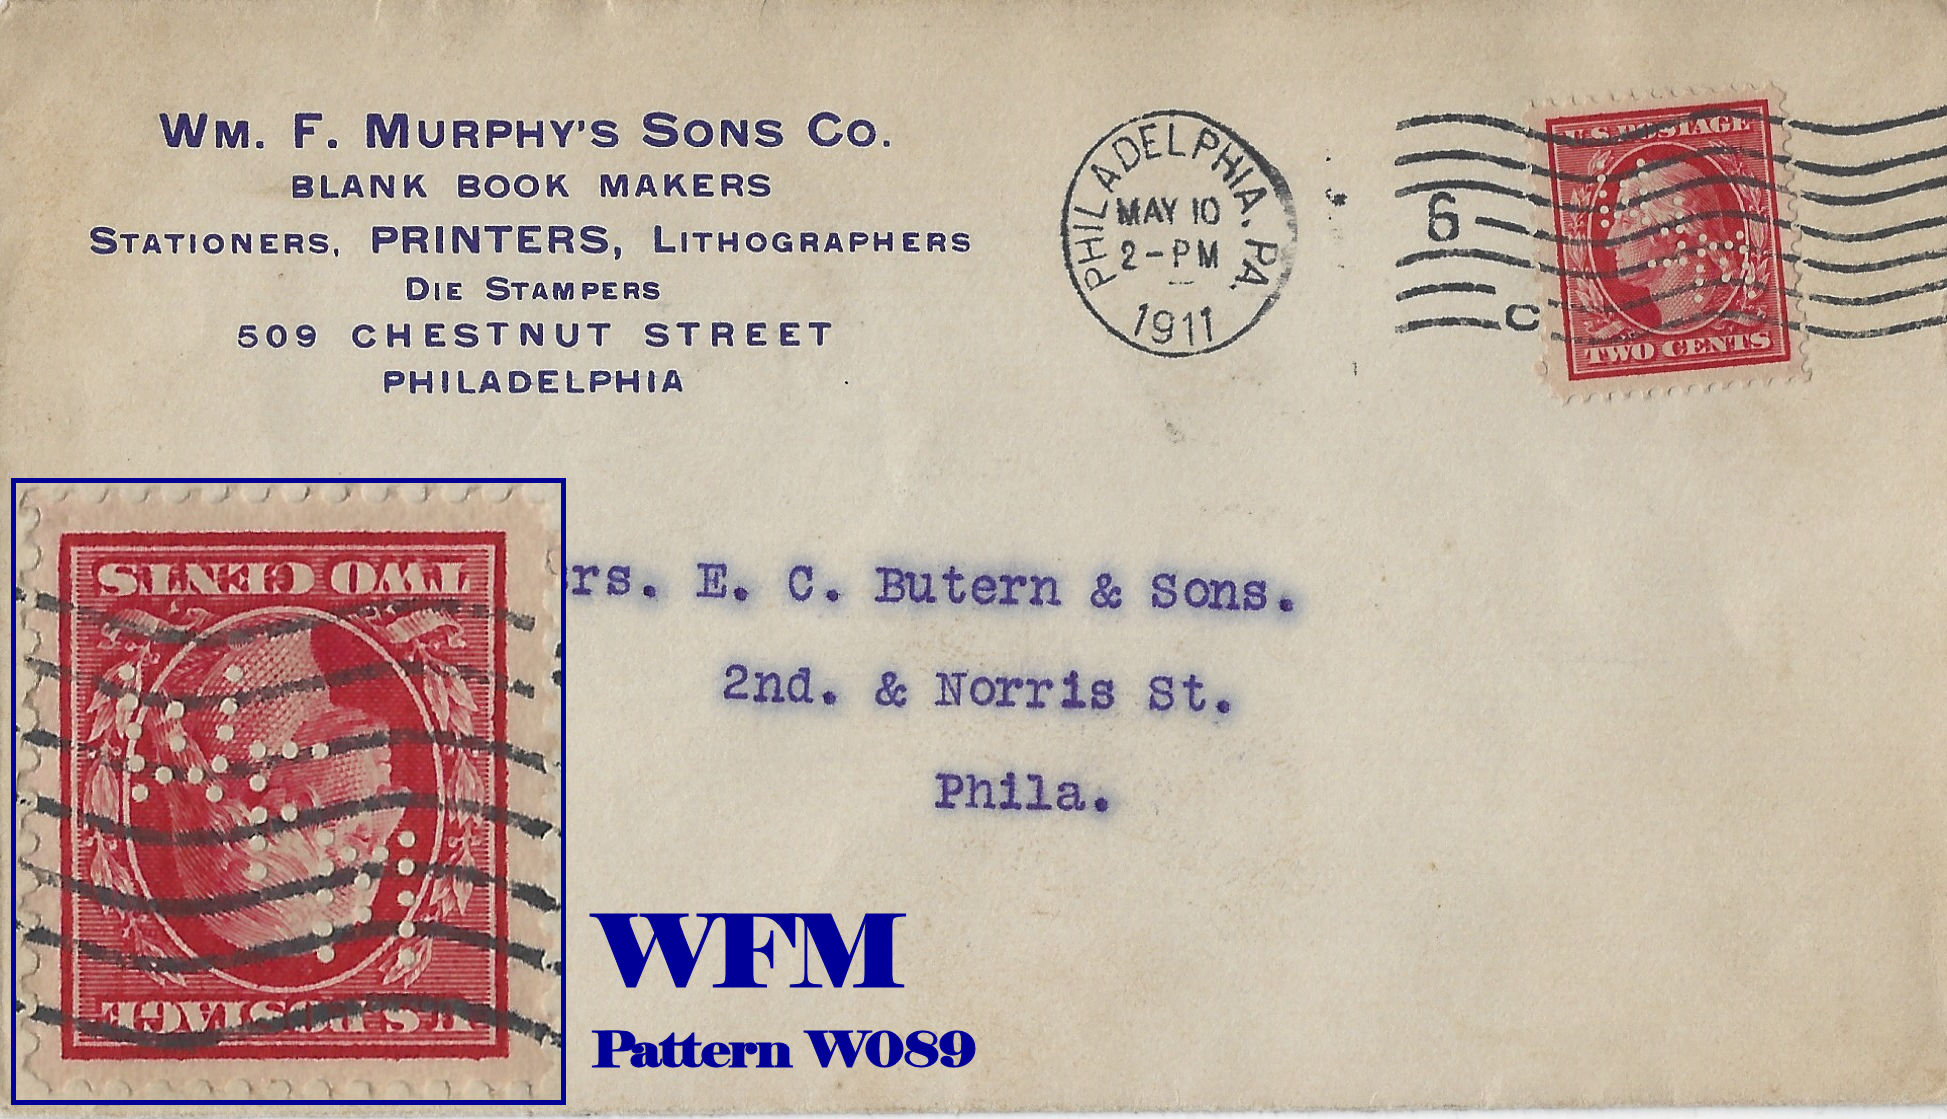 WESTERN UNION TELEGRAPH Co, JACKSONVILLE, FL 1928 Postal Cover w/ perfin  stamp